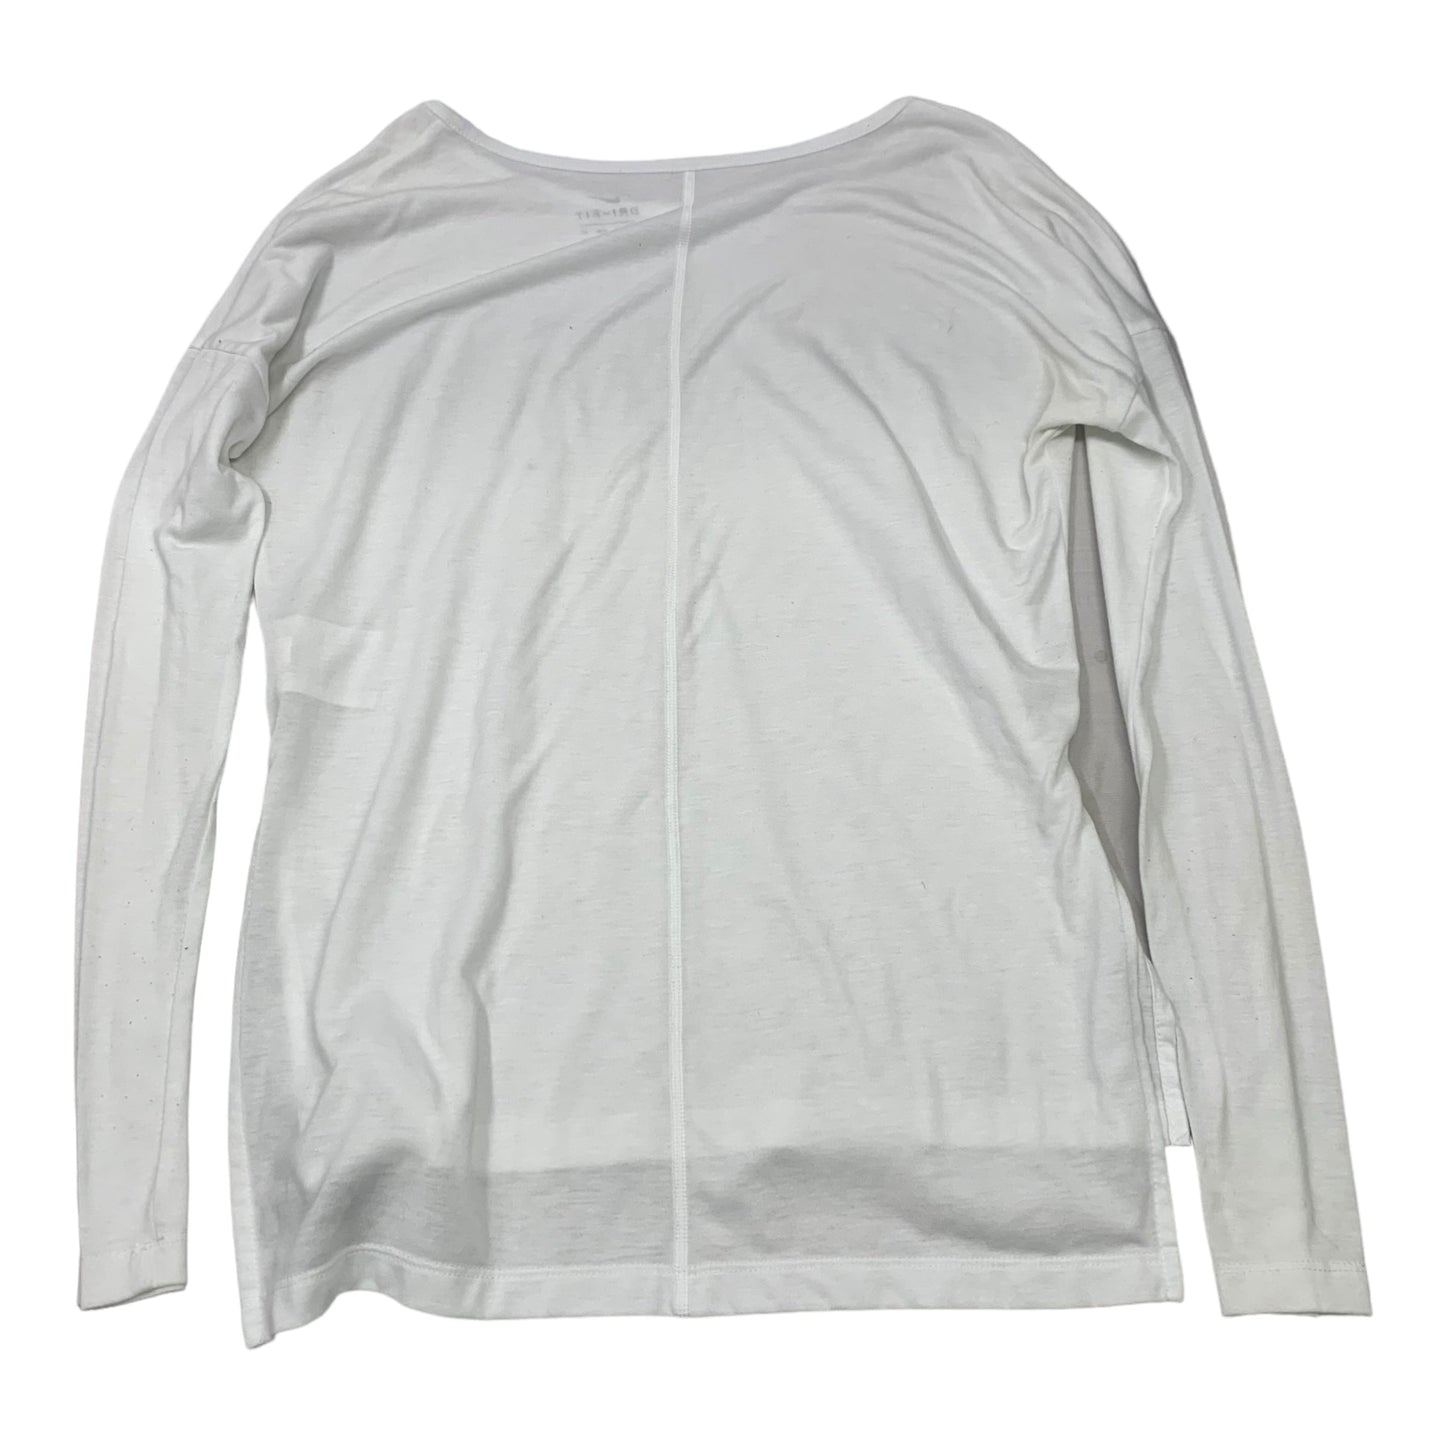 Athletic Top Long Sleeve Crewneck By Nike Apparel  Size: Xs